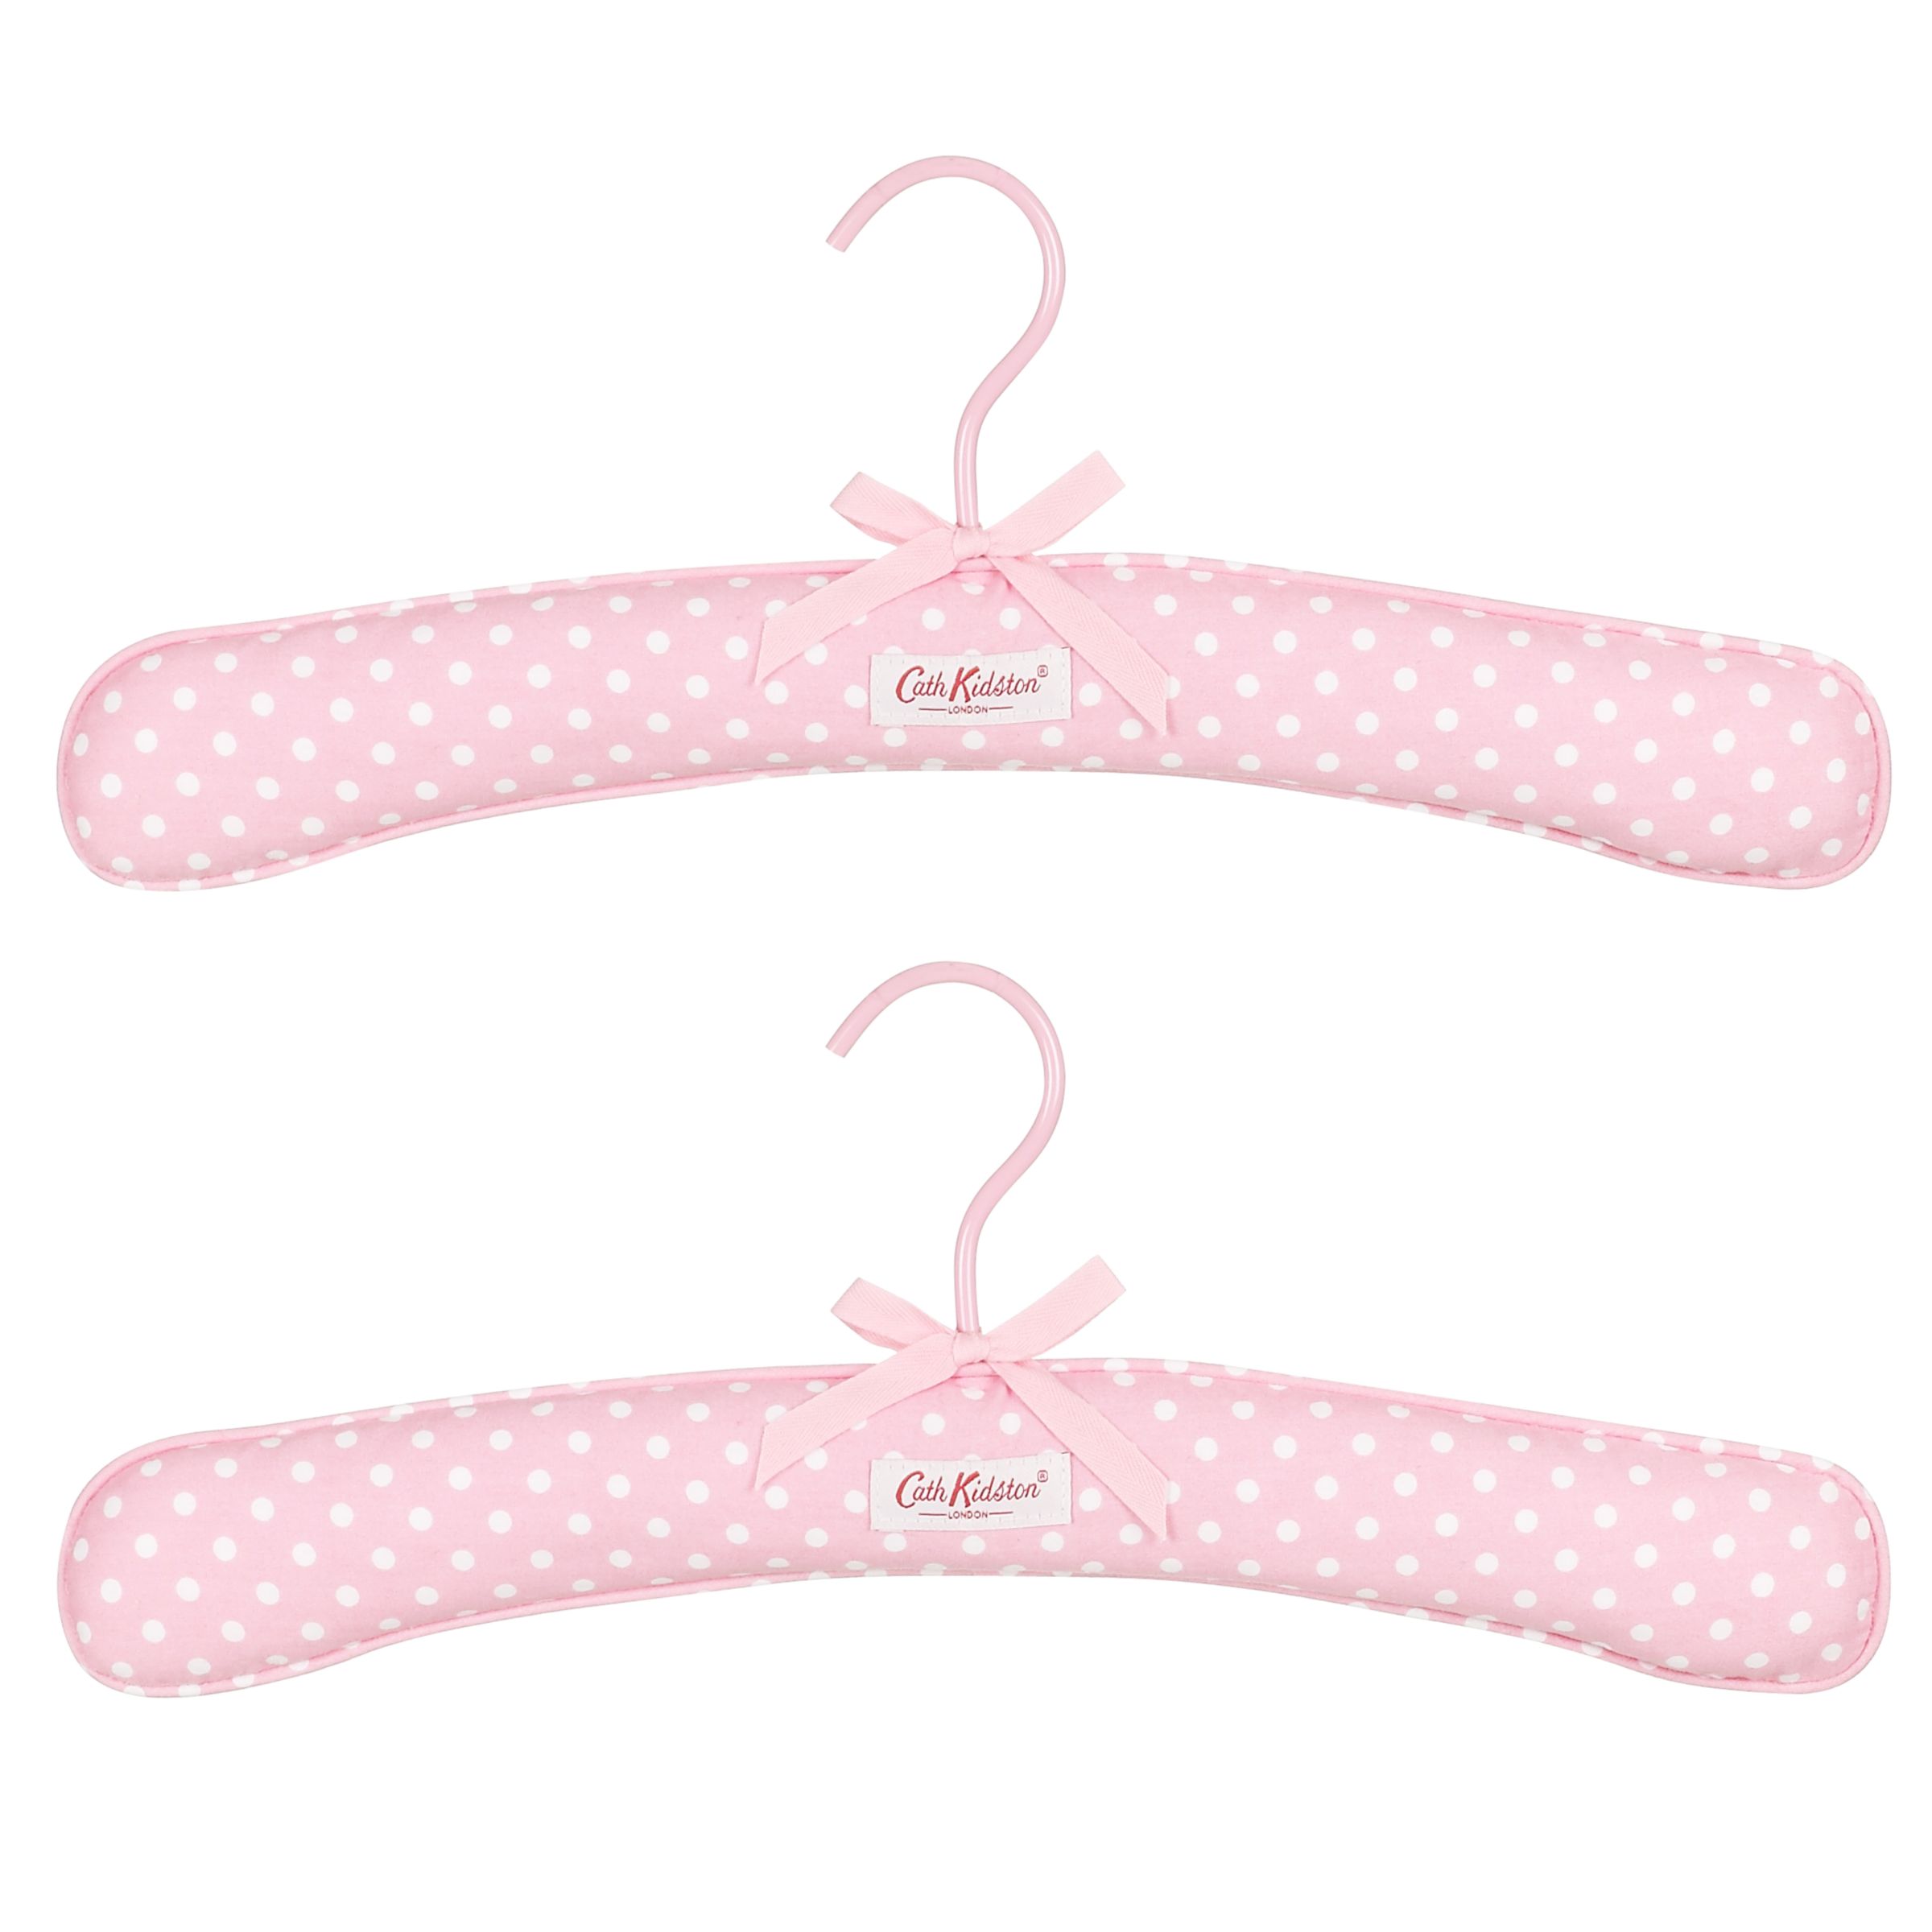 Cath Kidston Wild Flowers Rose Scented Hangers,